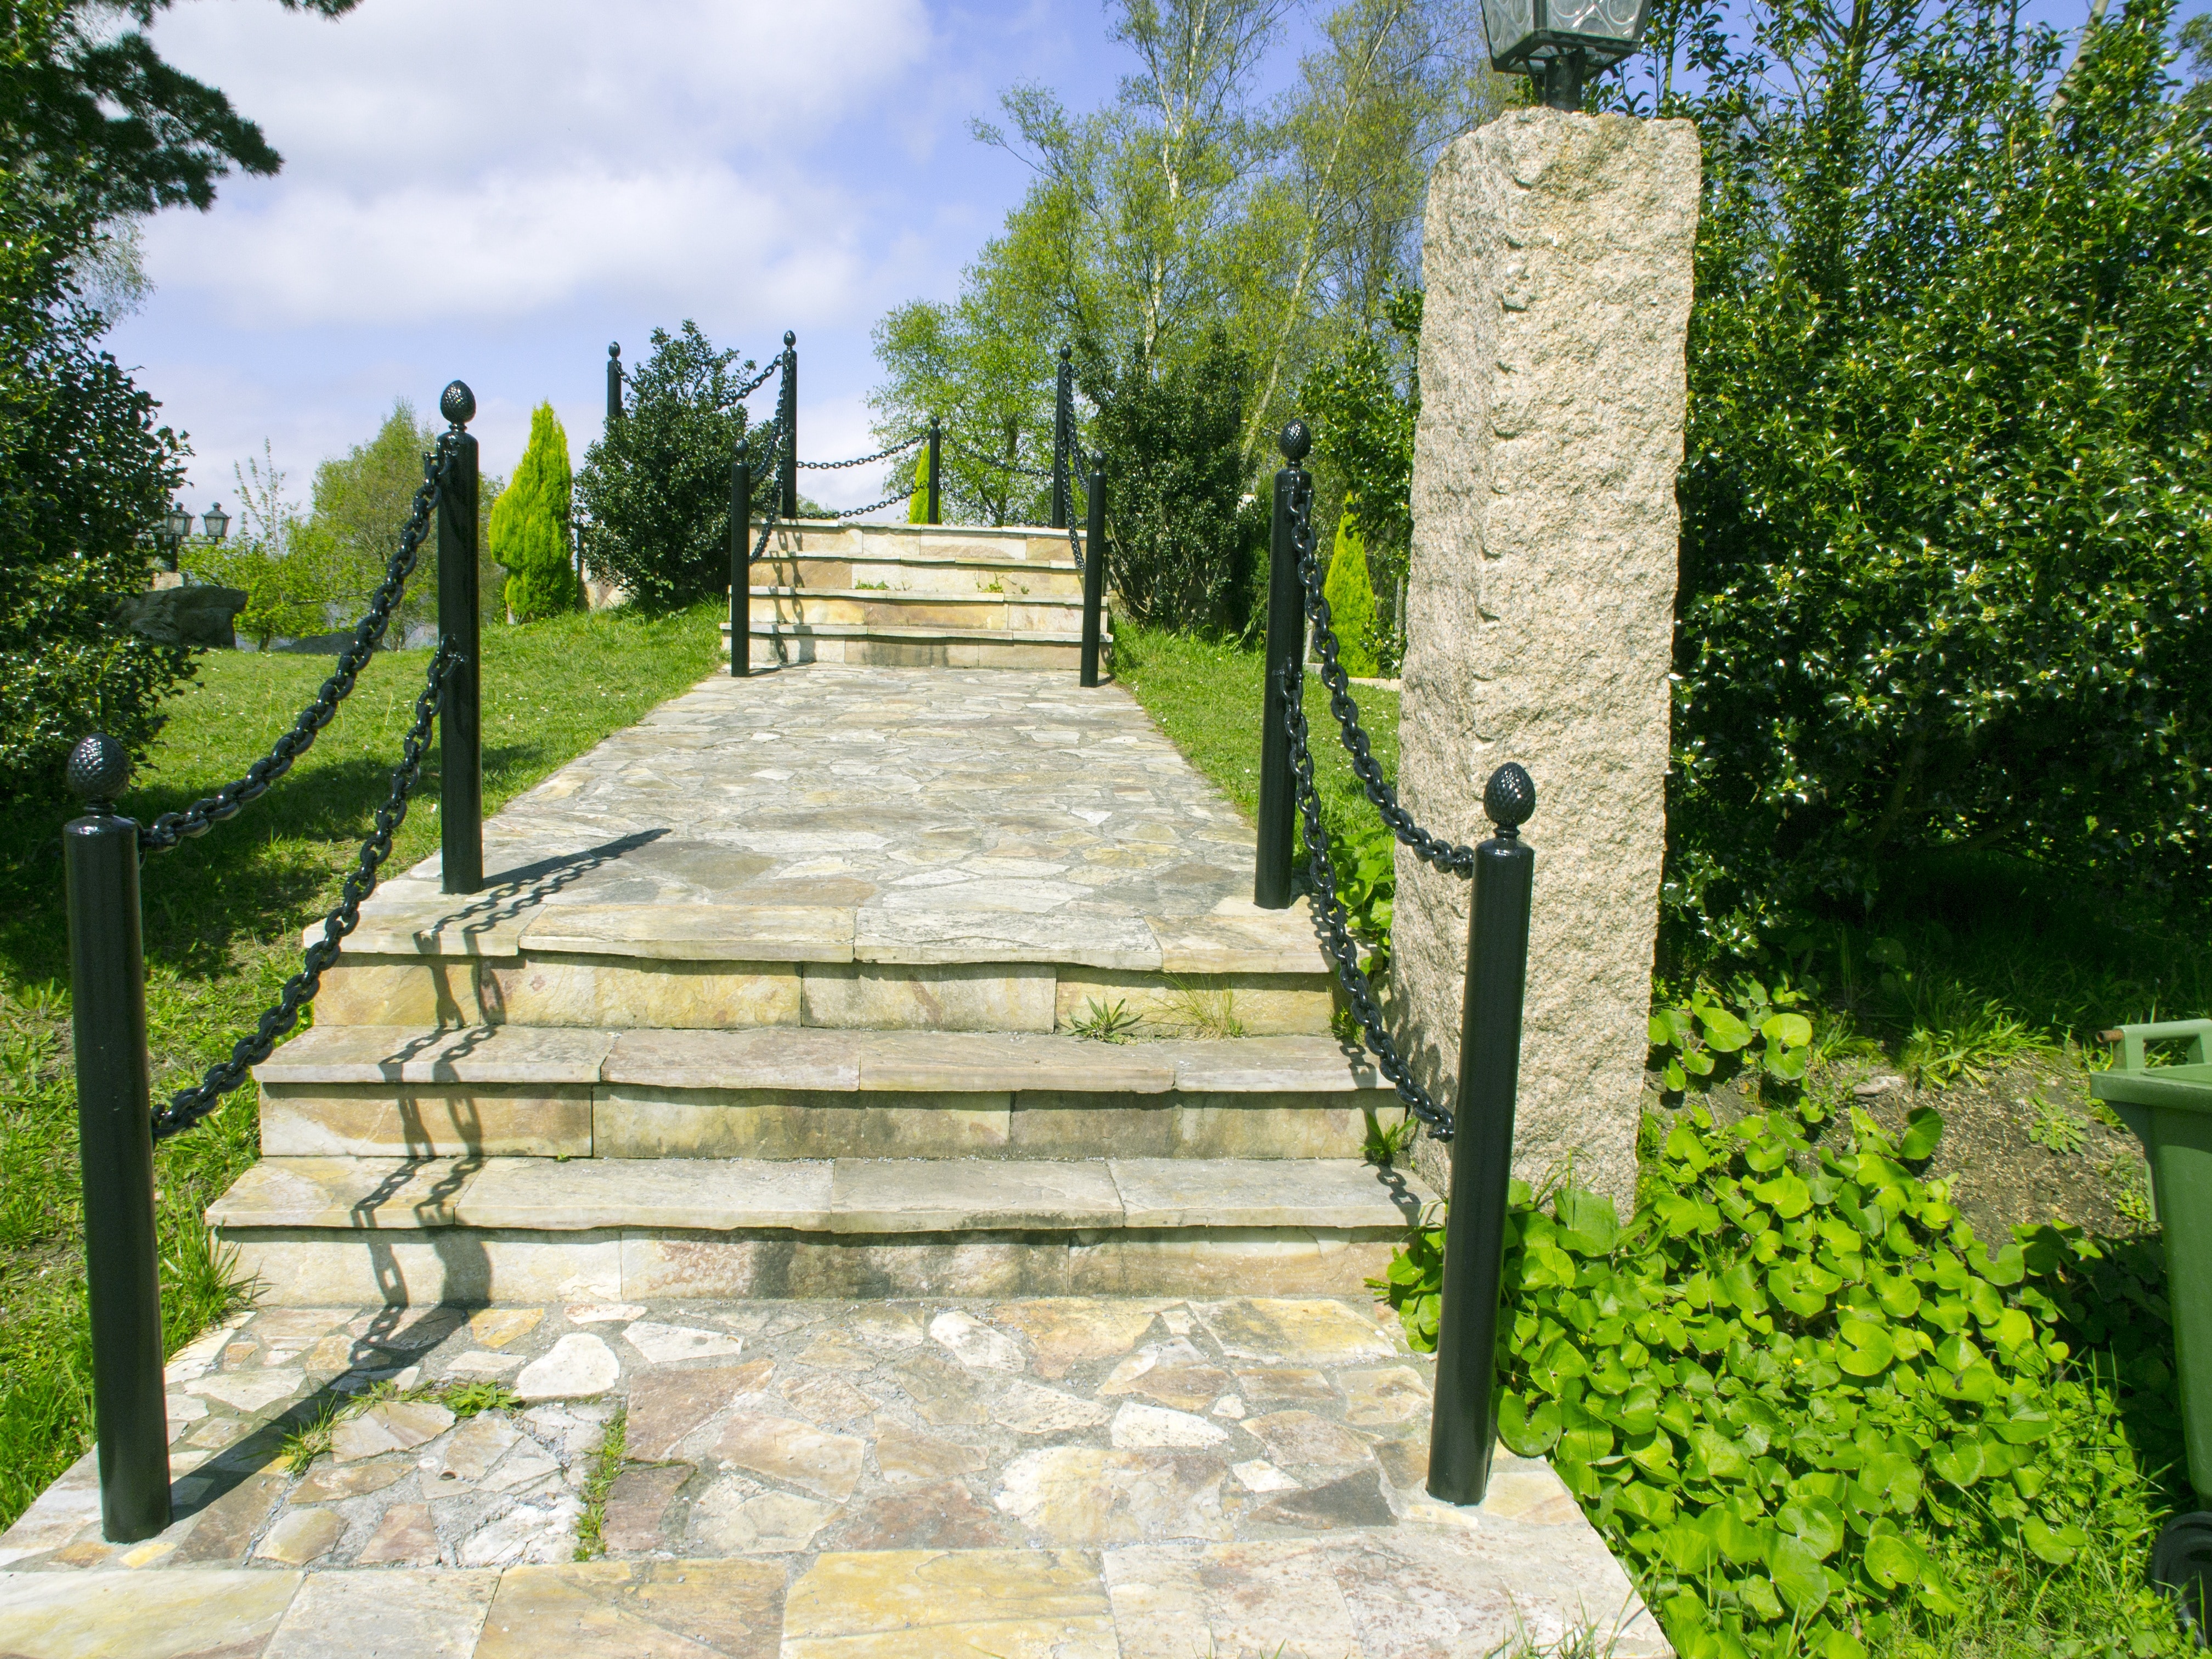 grey stairs with tiles and railings near tall trees during daytime